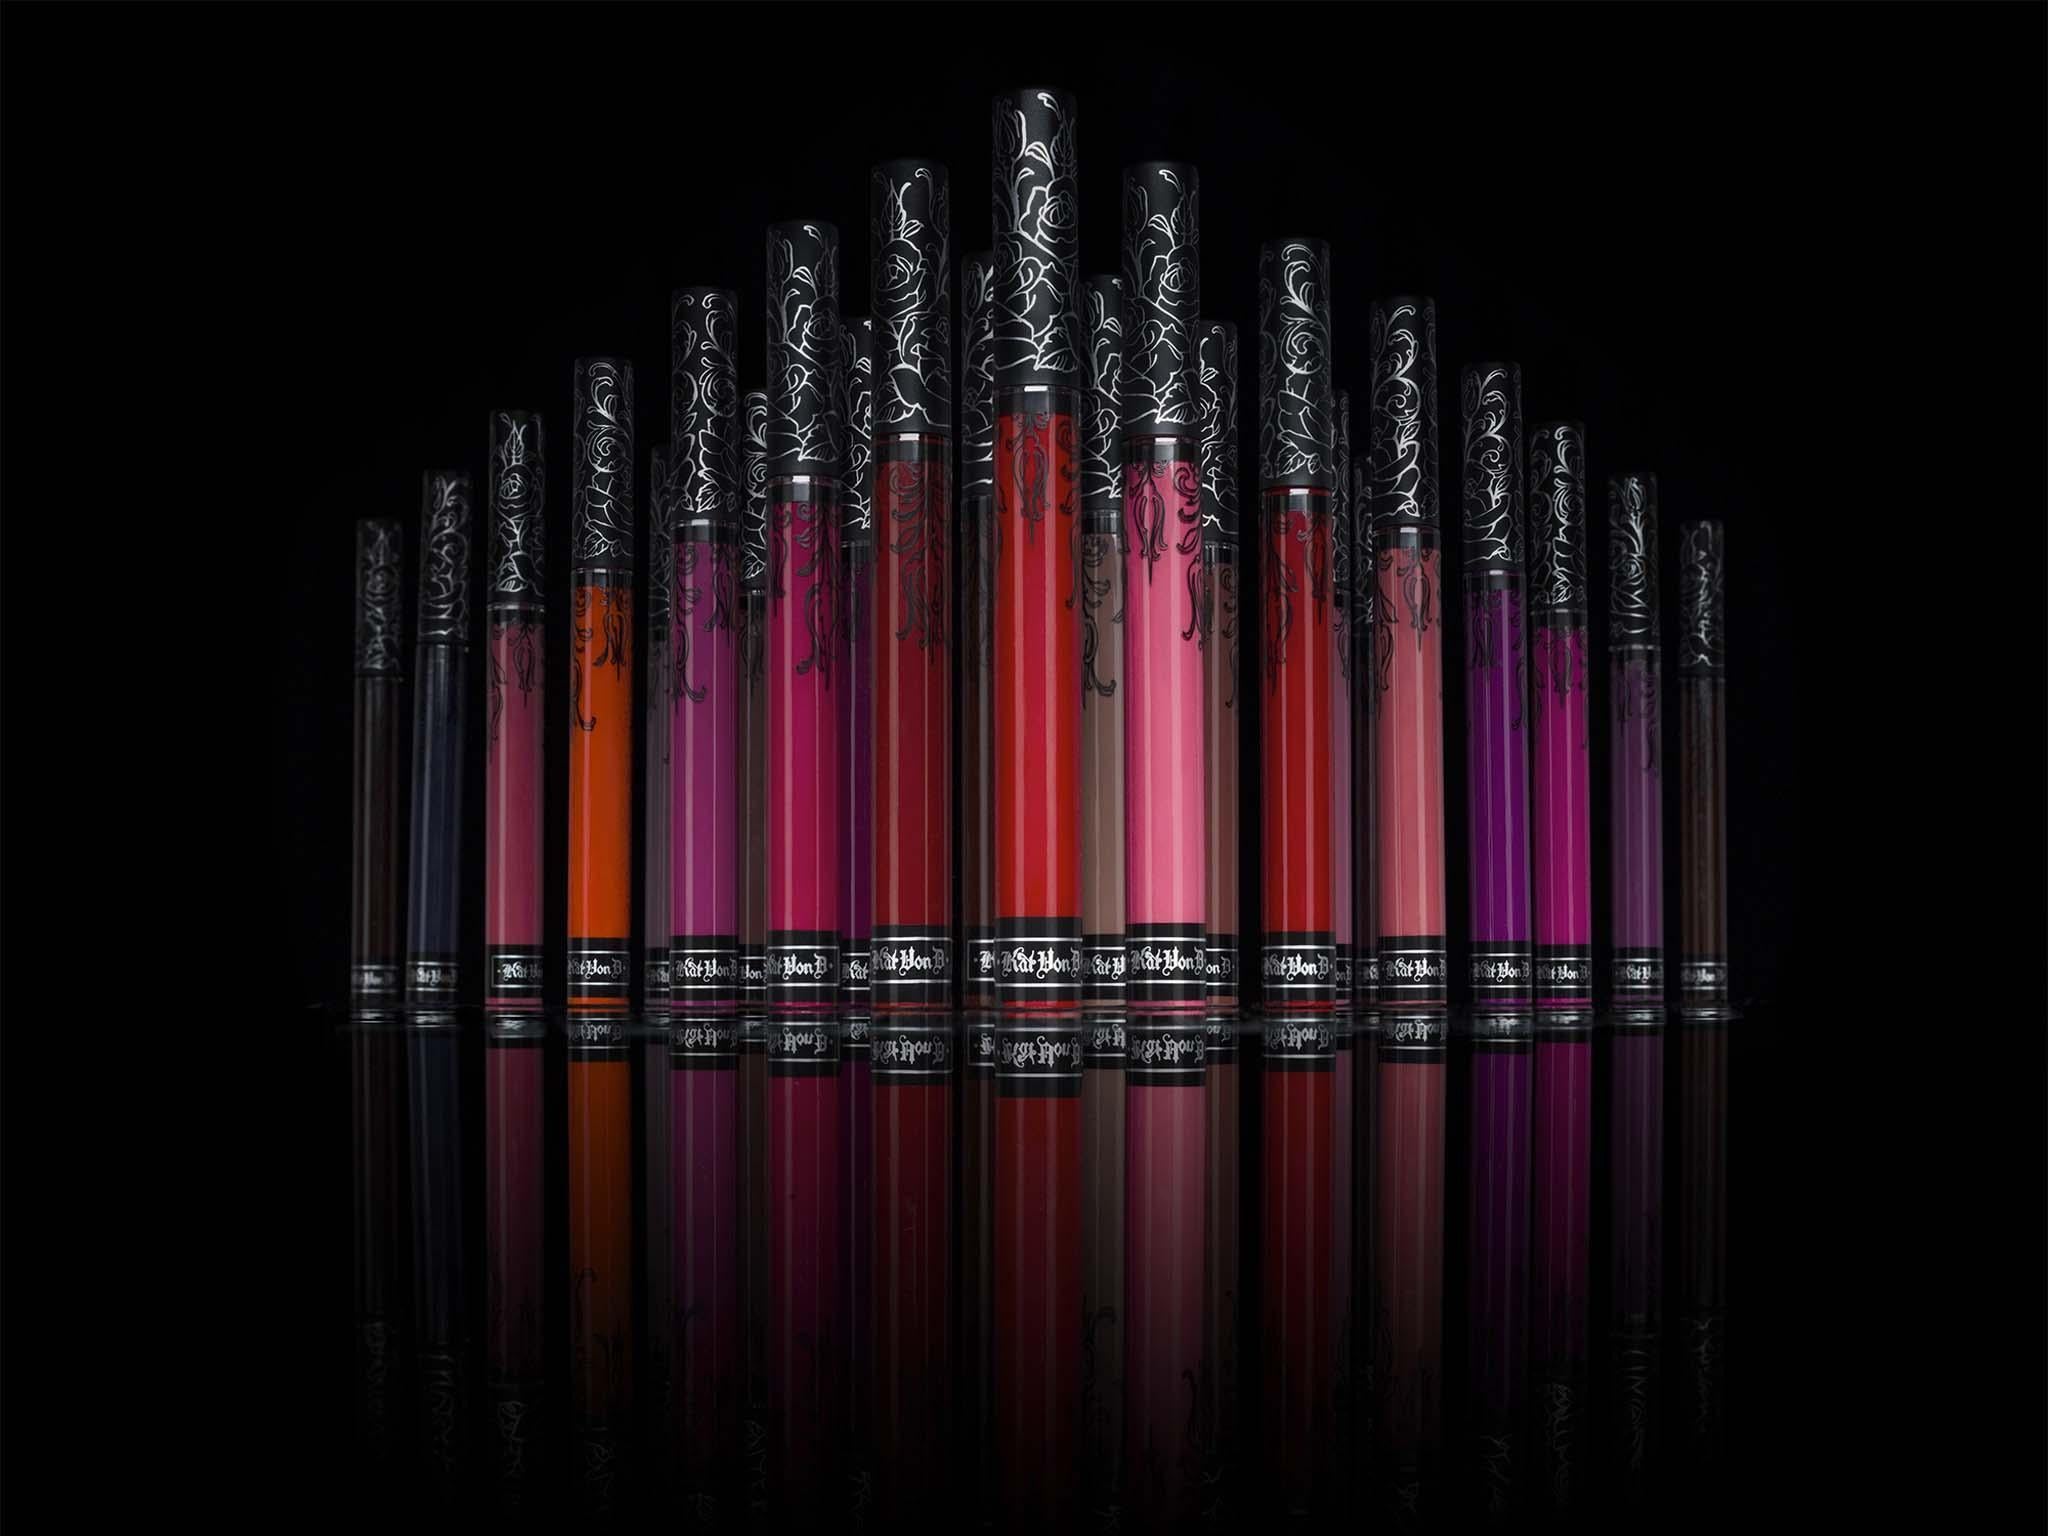 Kat Von D’s eponymous beauty line launches in the UK on 13 September